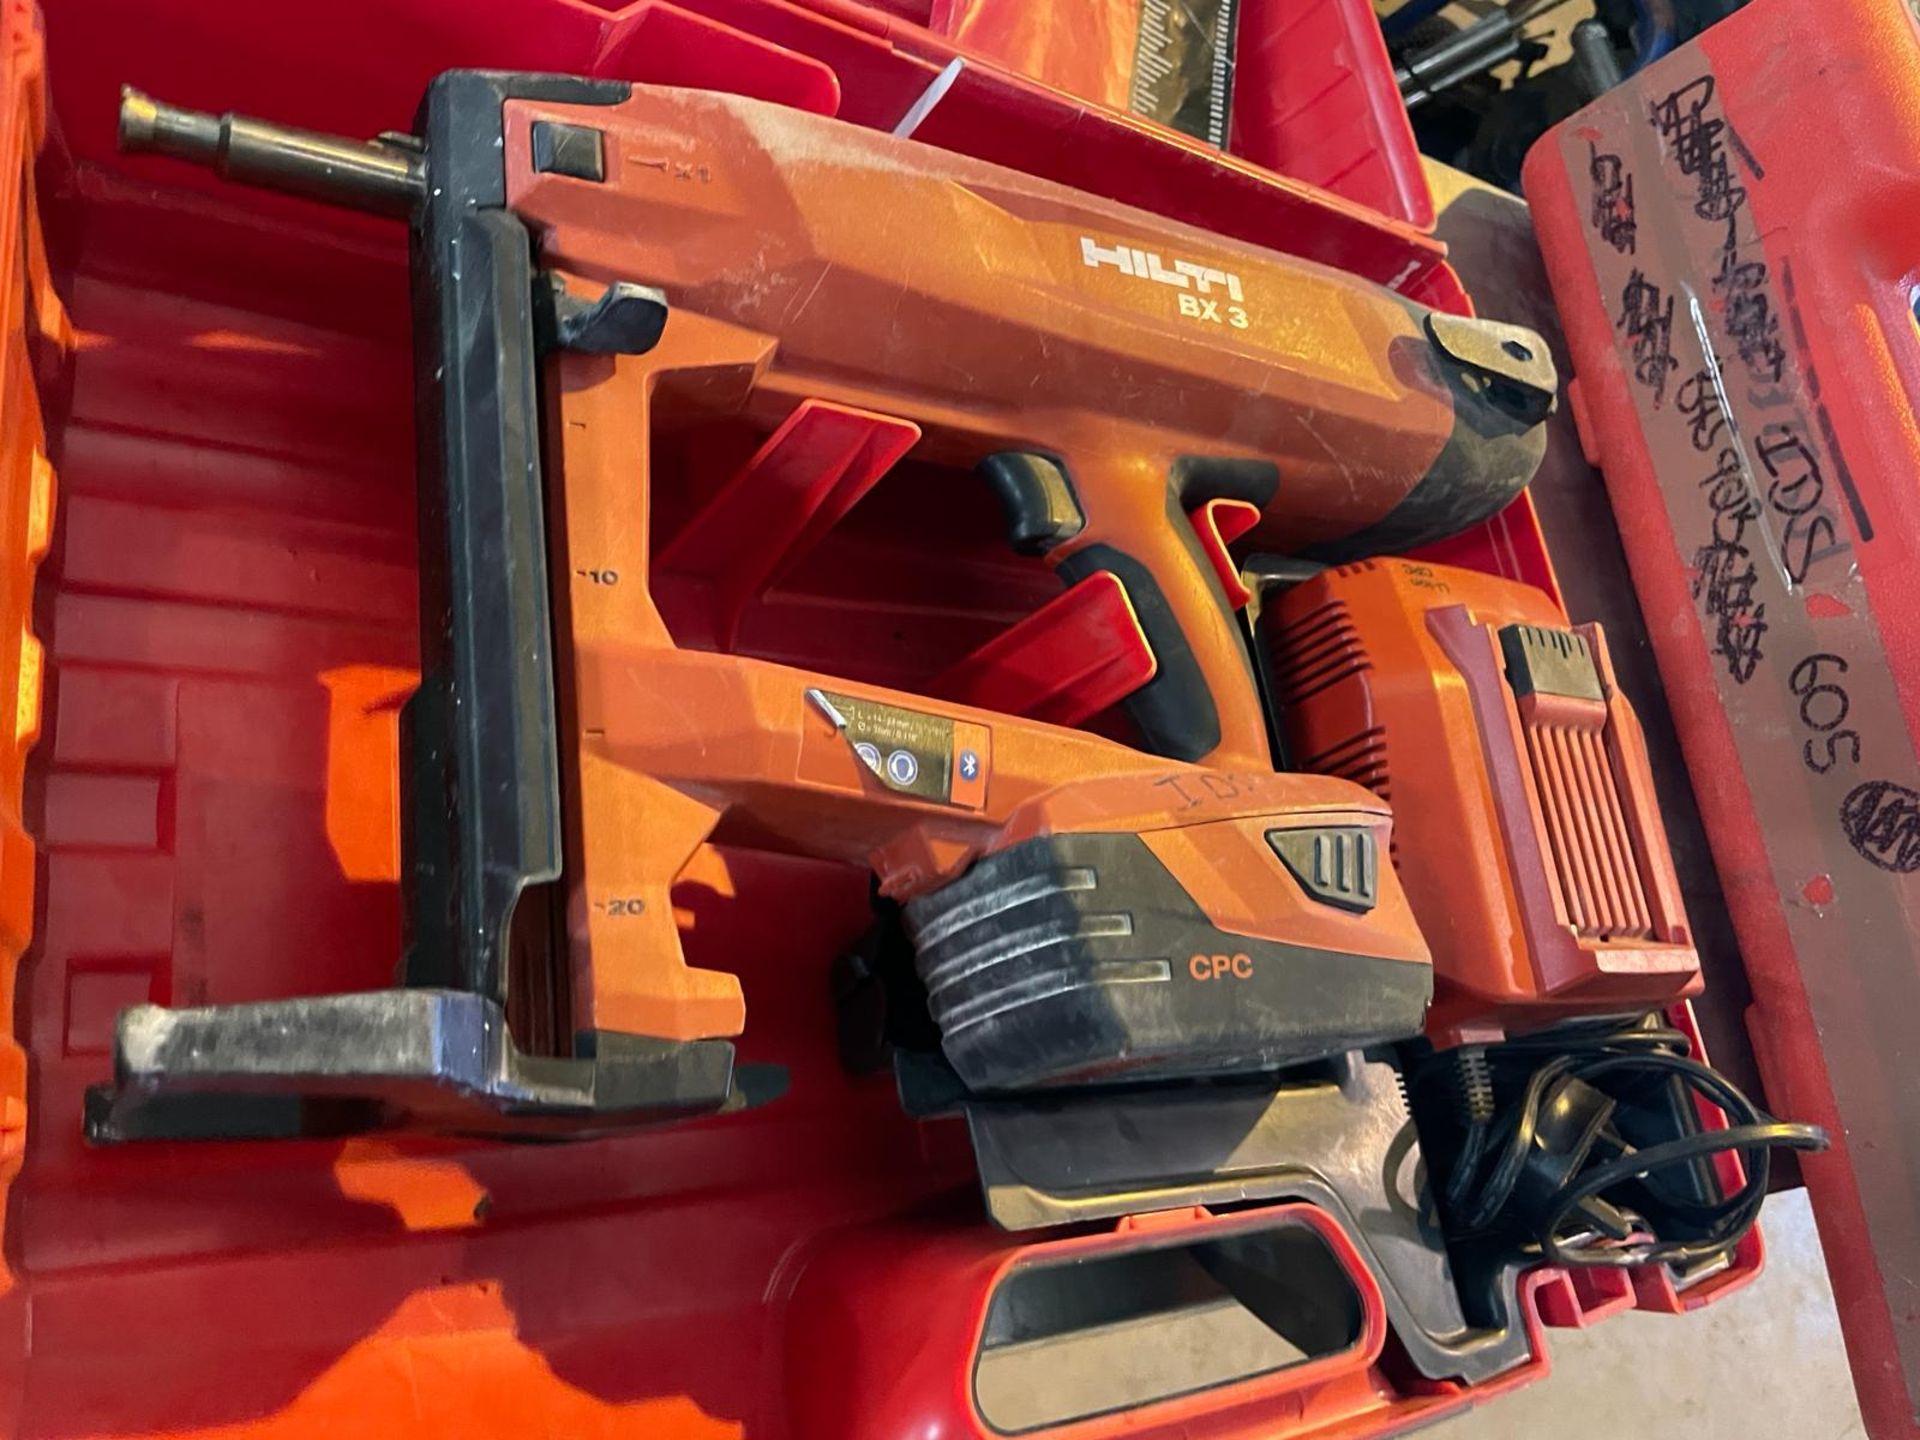 1 x Hilti BX3 Cordless Nail Gun Fastening Tool - Includes Case, Battery and Charger - RRP £3,400 - Bild 4 aus 7